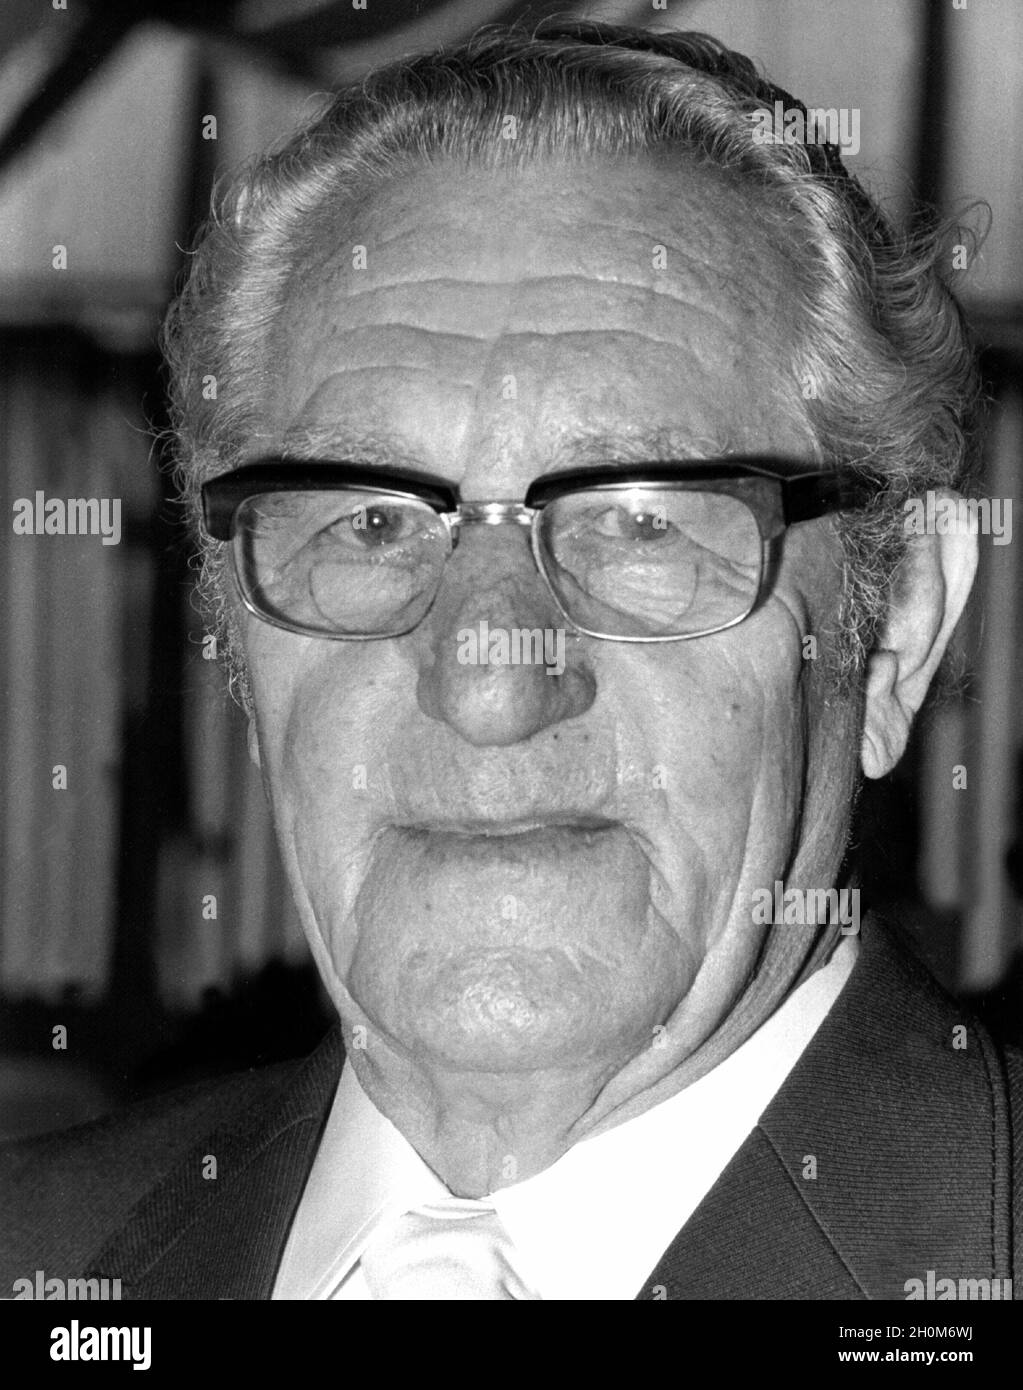 Rudolf "Rudi" Dassler. Founder and owner of the "Puma" sports shoe factories in Herzogenaurach near Nuremberg, recorded on April 29, 1973 on the occasion of his 75th birthday, his 50th professional anniversary and the 25th anniversary of his company. Stock Photo